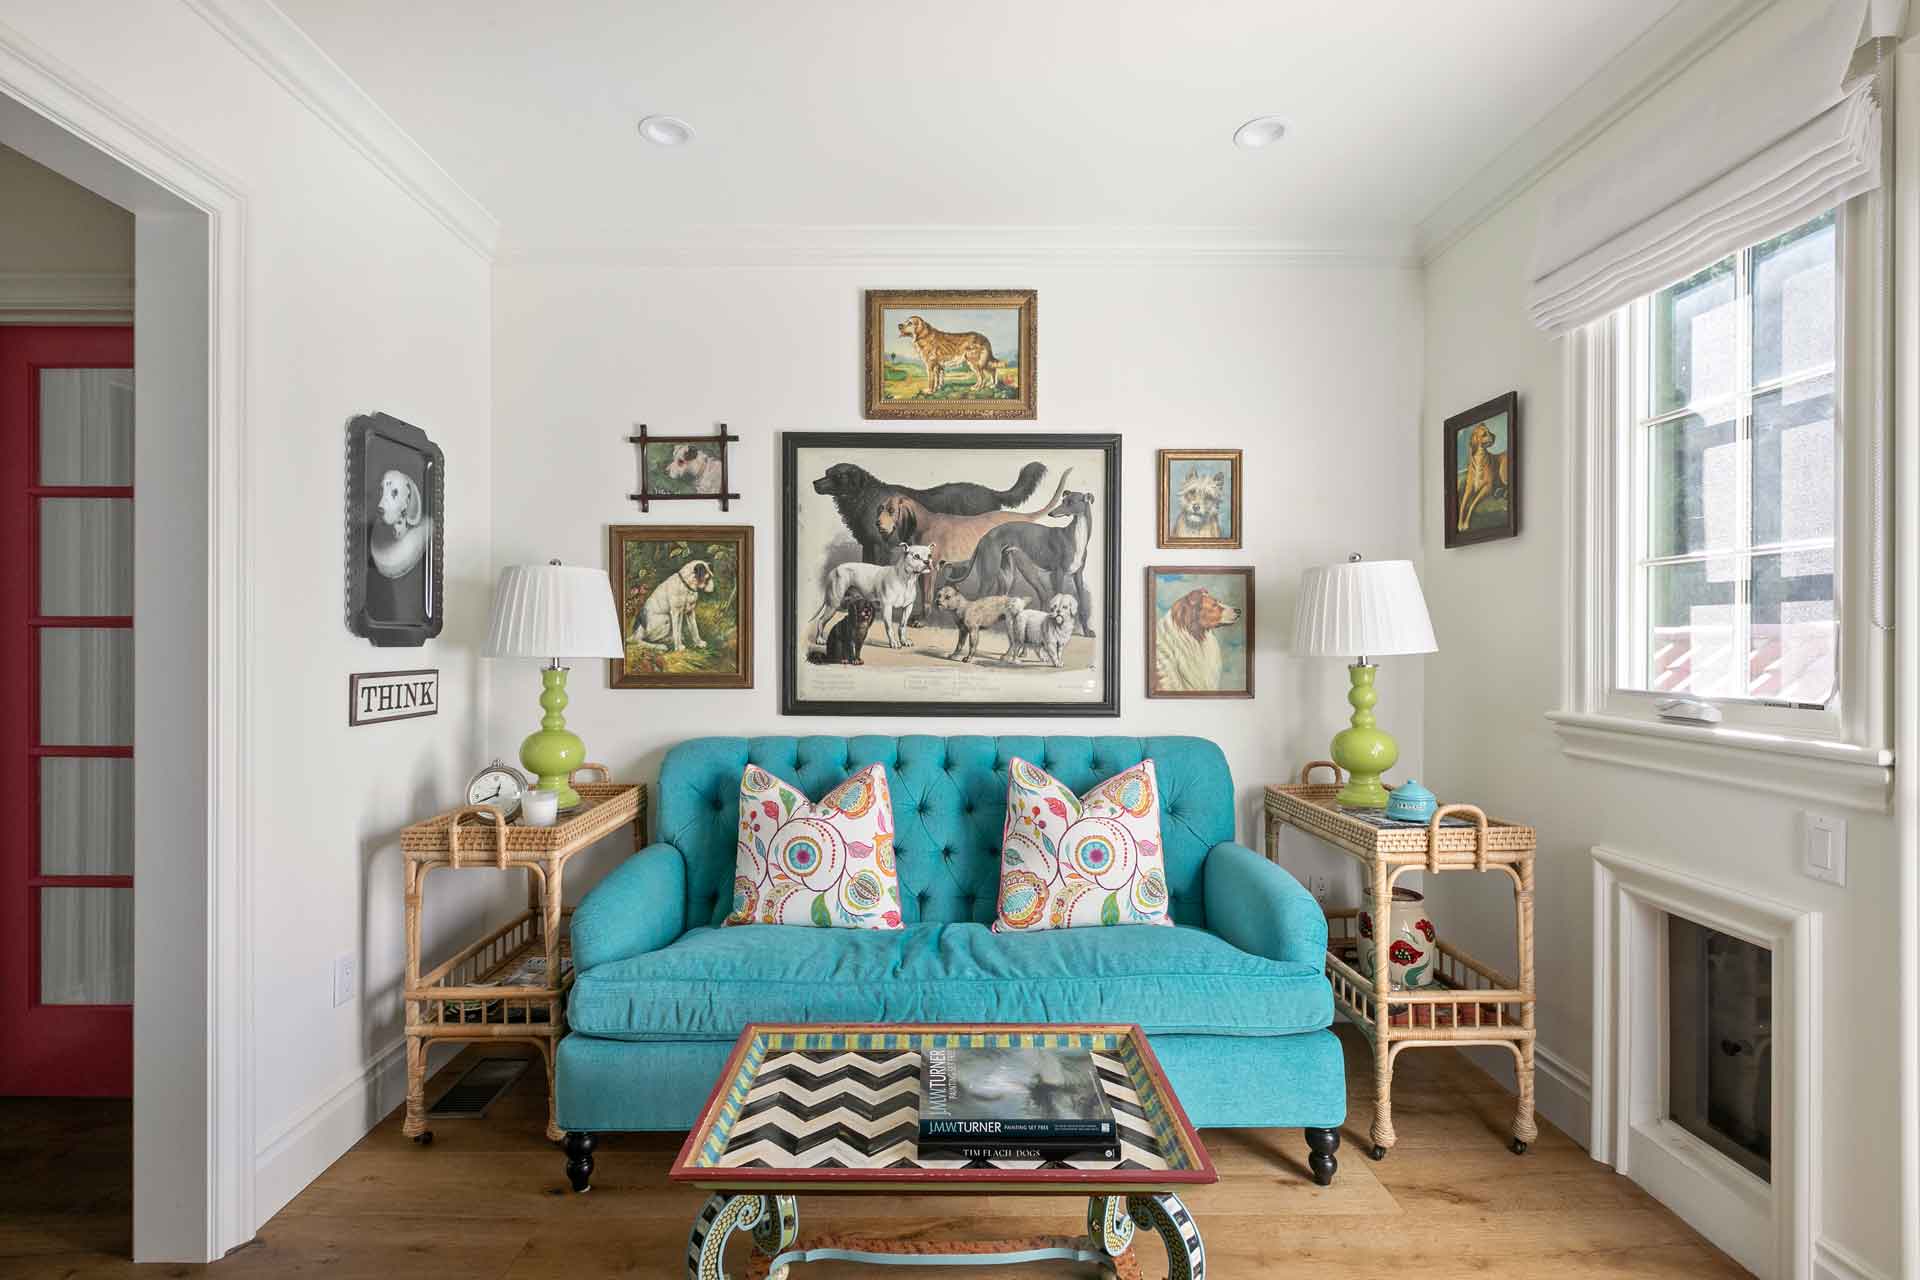 Living area with teal blue velvet sofa and gallery wall.